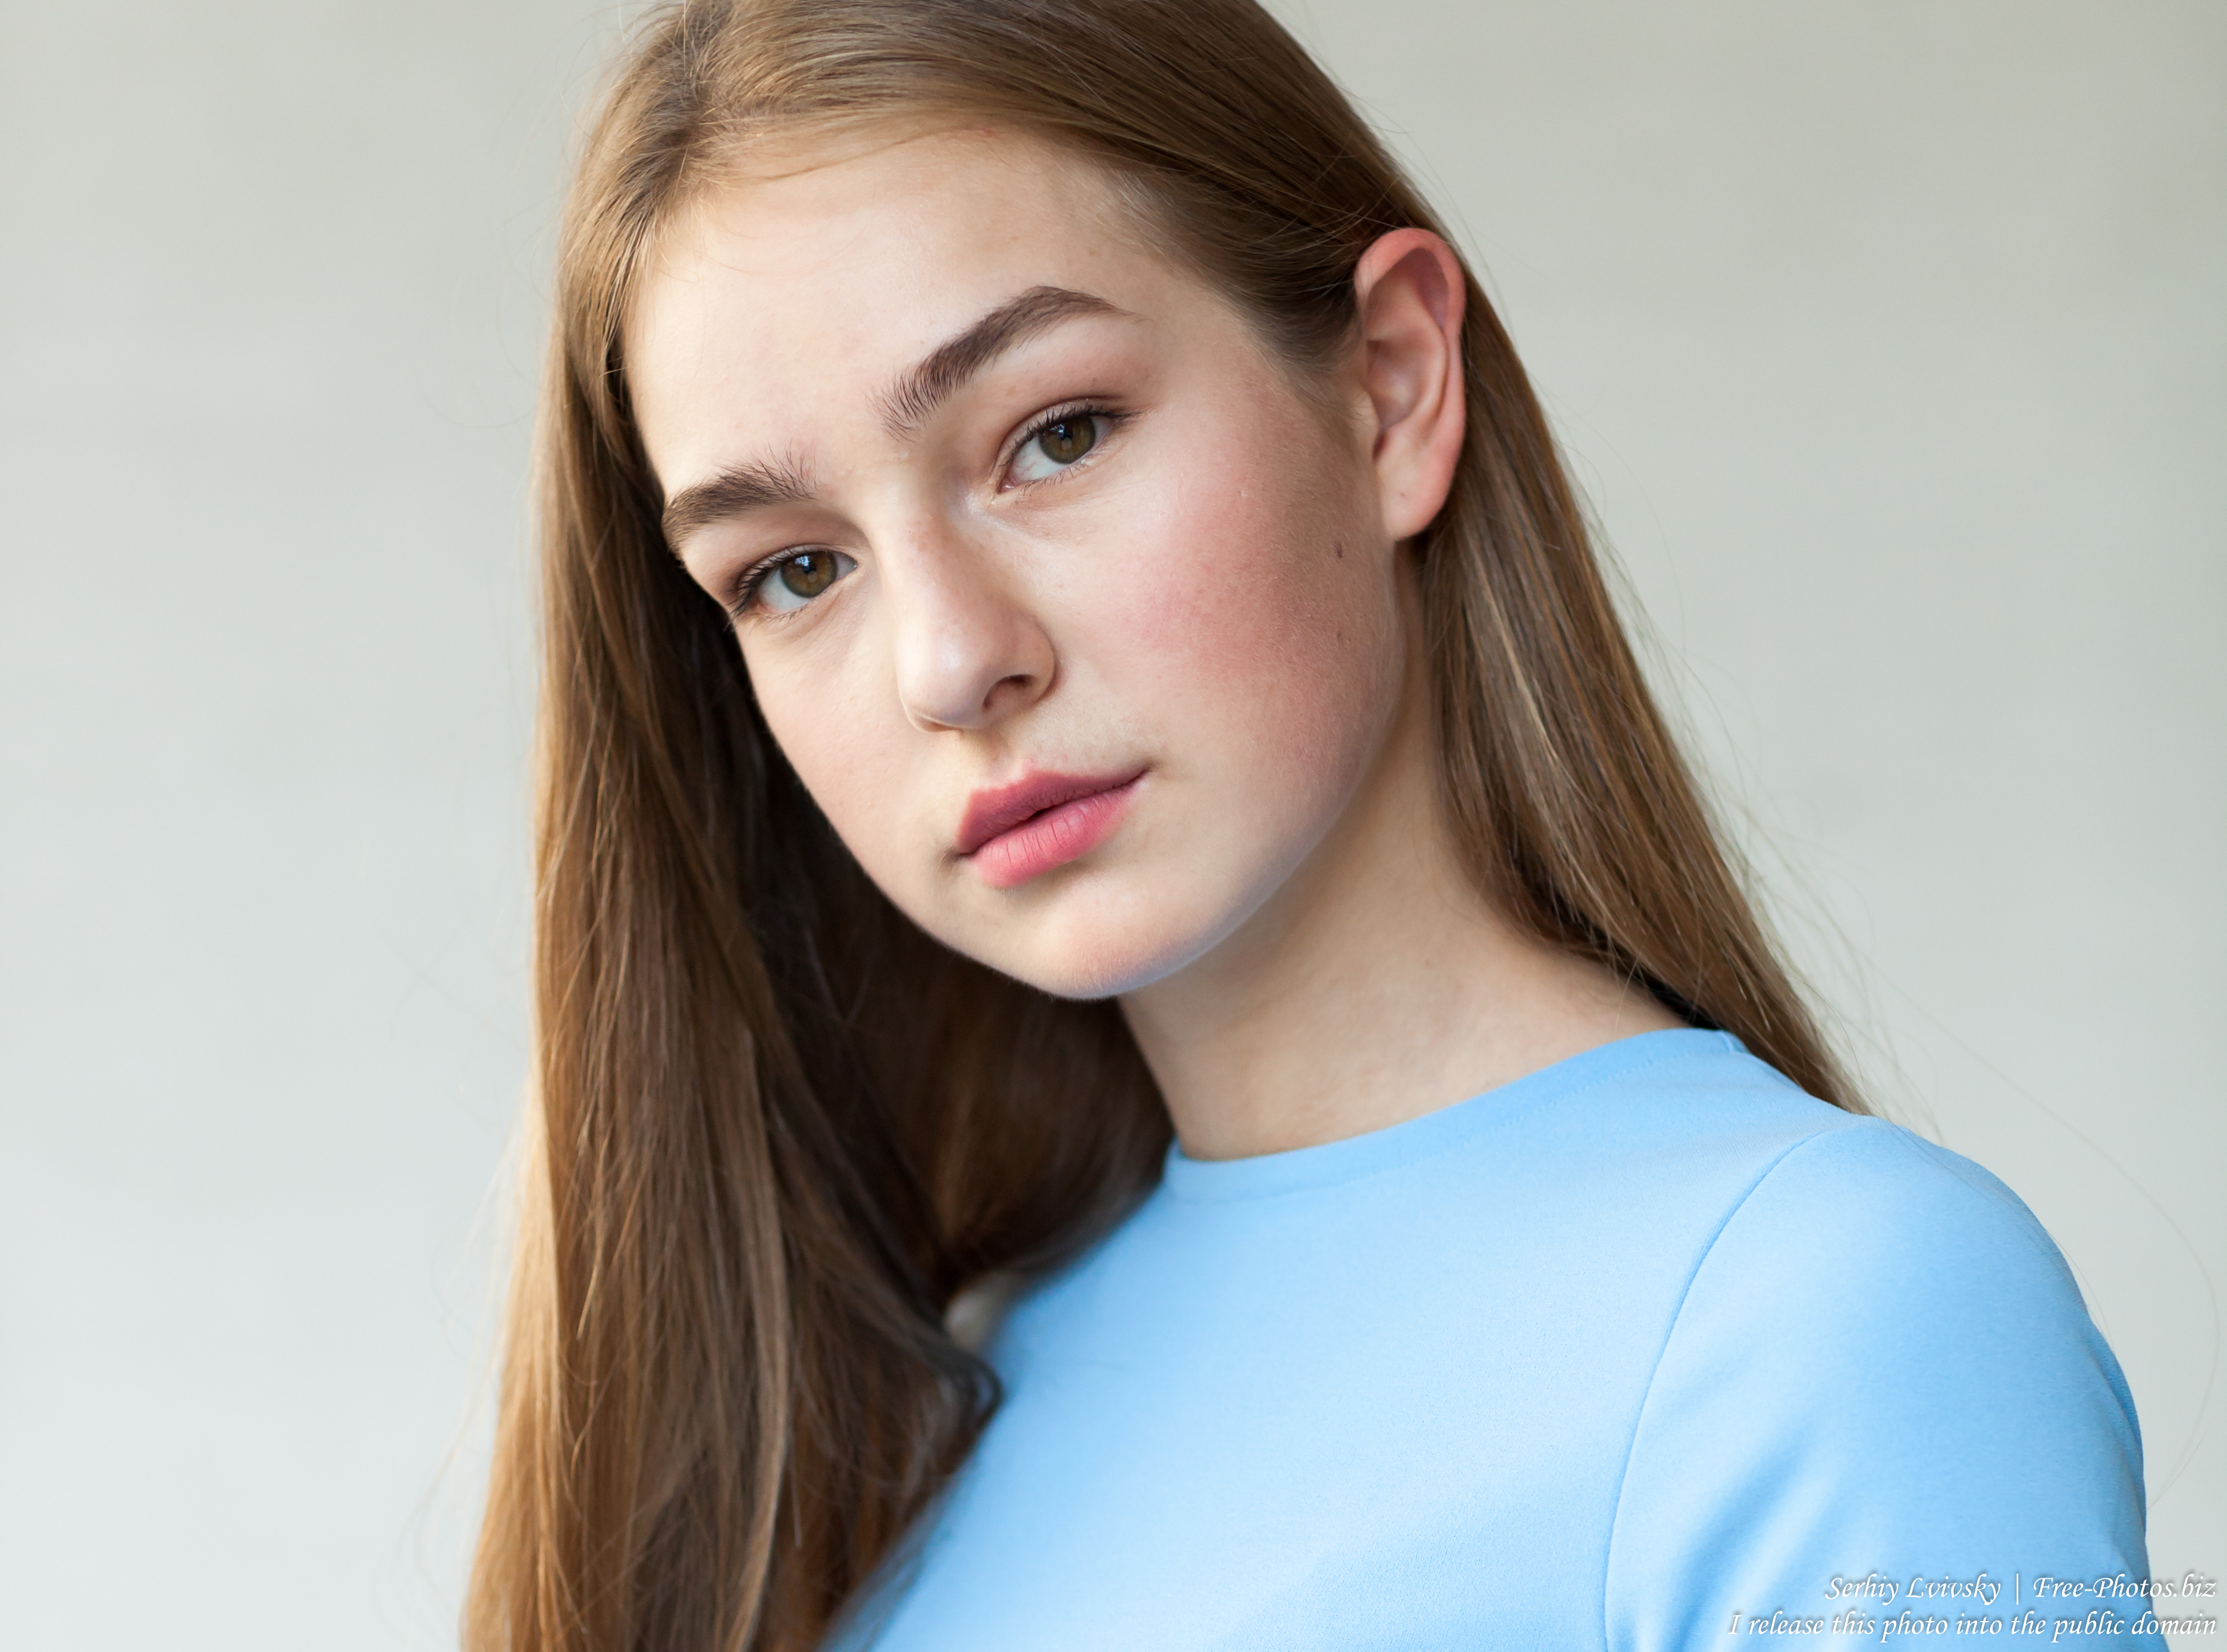 justyna_a_16-year-old_fair-haired_girl_photographed_in_june_2018_by_serhiy_lvivsky_07